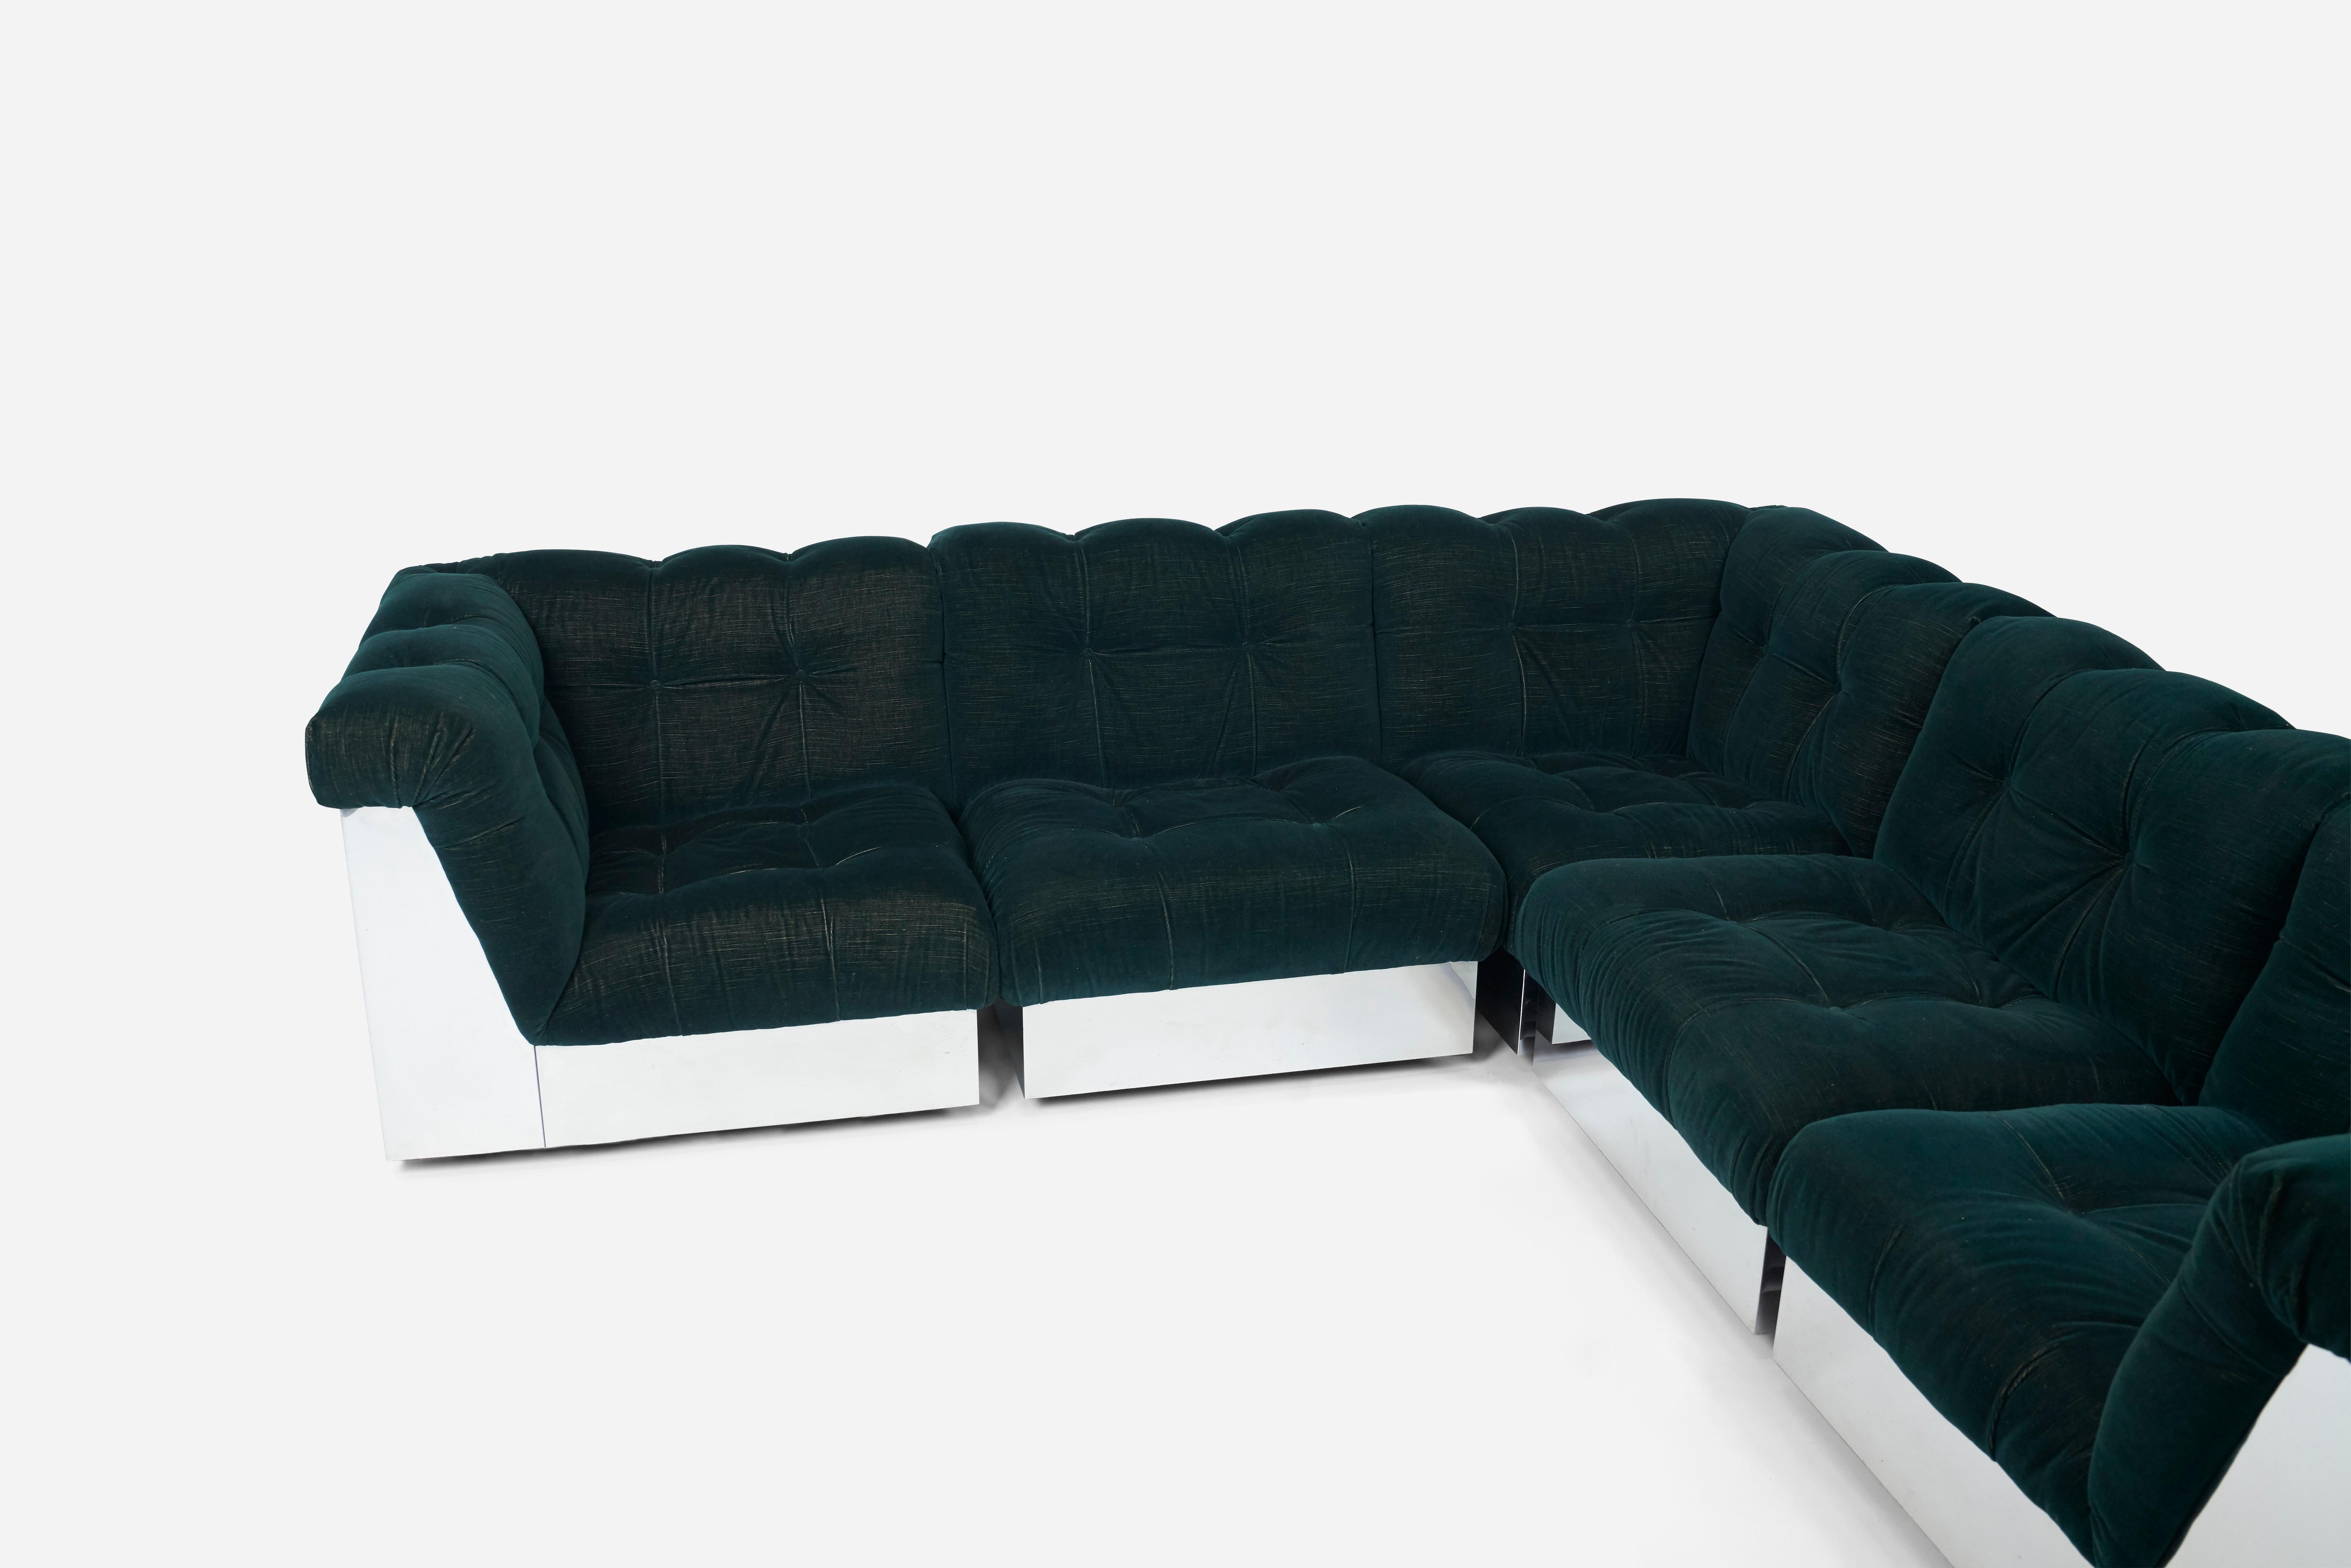 Stainless steel cased sectional sofas with original, deep tufted mohair velvet upholstery, designed by Giorgio Montani for Souplina. Manufactured by Souplina, French, 1970s. 4 corner sections are 33